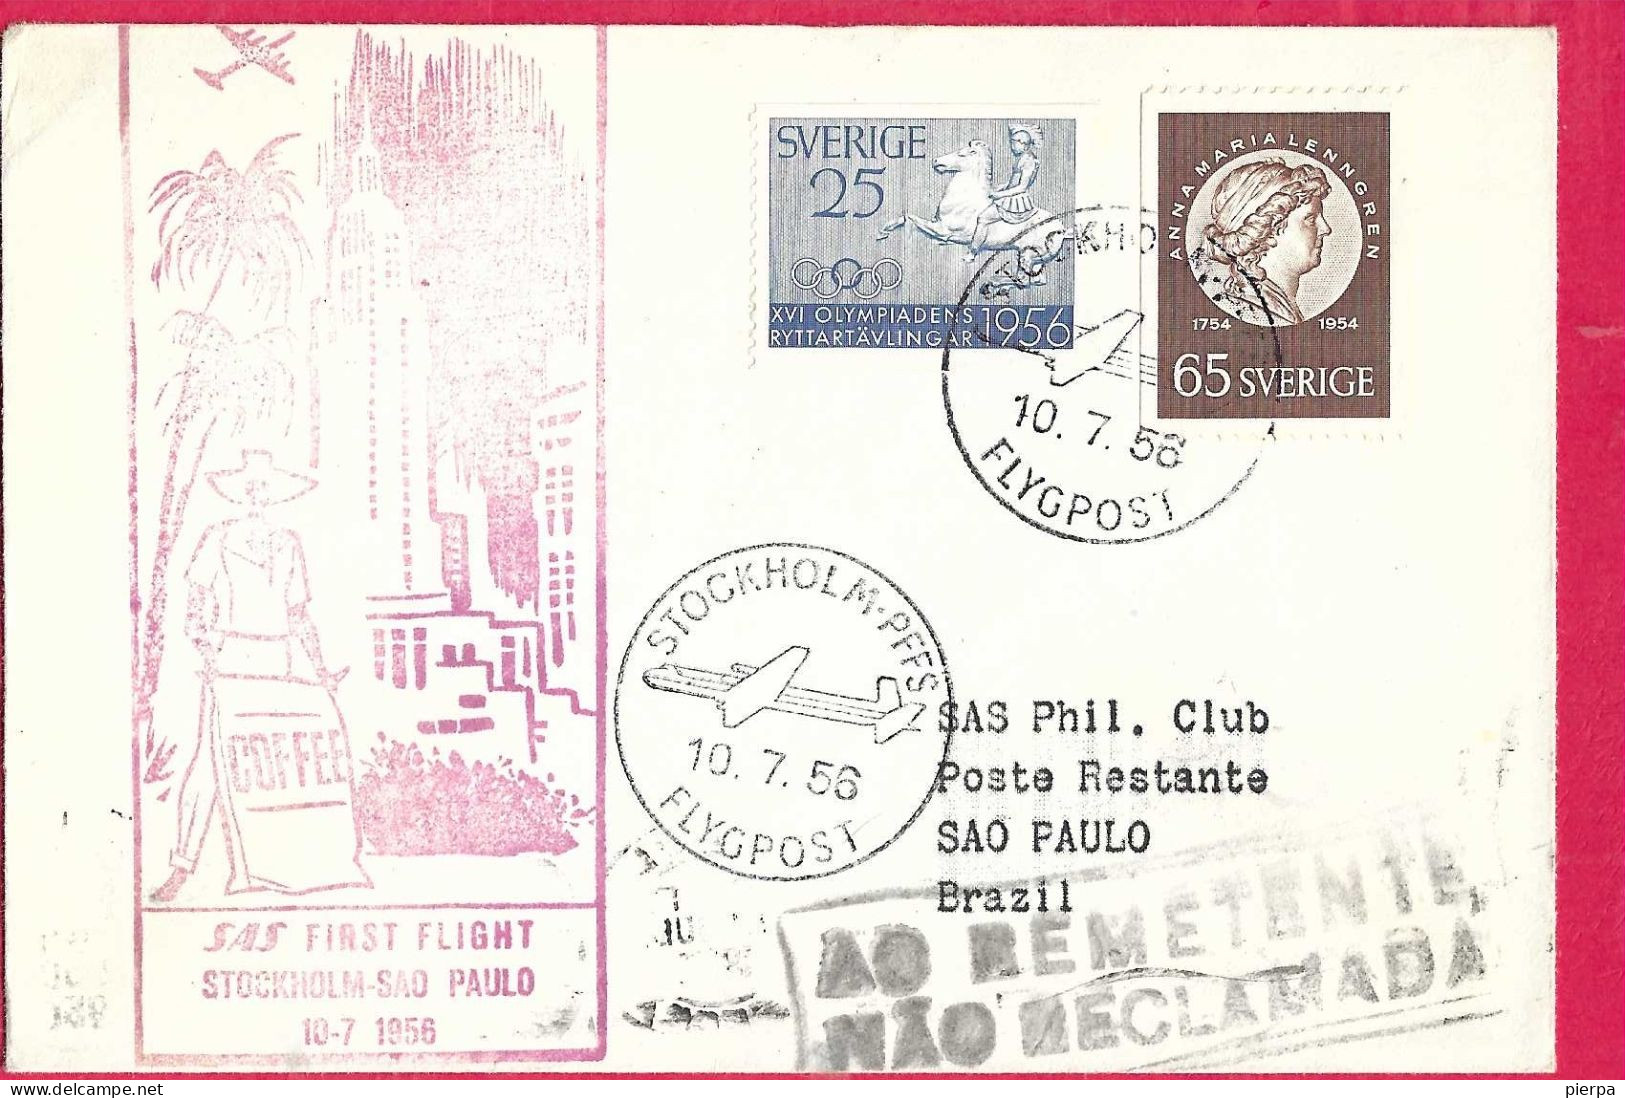 SVERIGE - FIRST FLIGHT SAS FROM STOCKHOLM TO SAO PAULO *10.7.56* ON OFFICIAL COVER - Covers & Documents